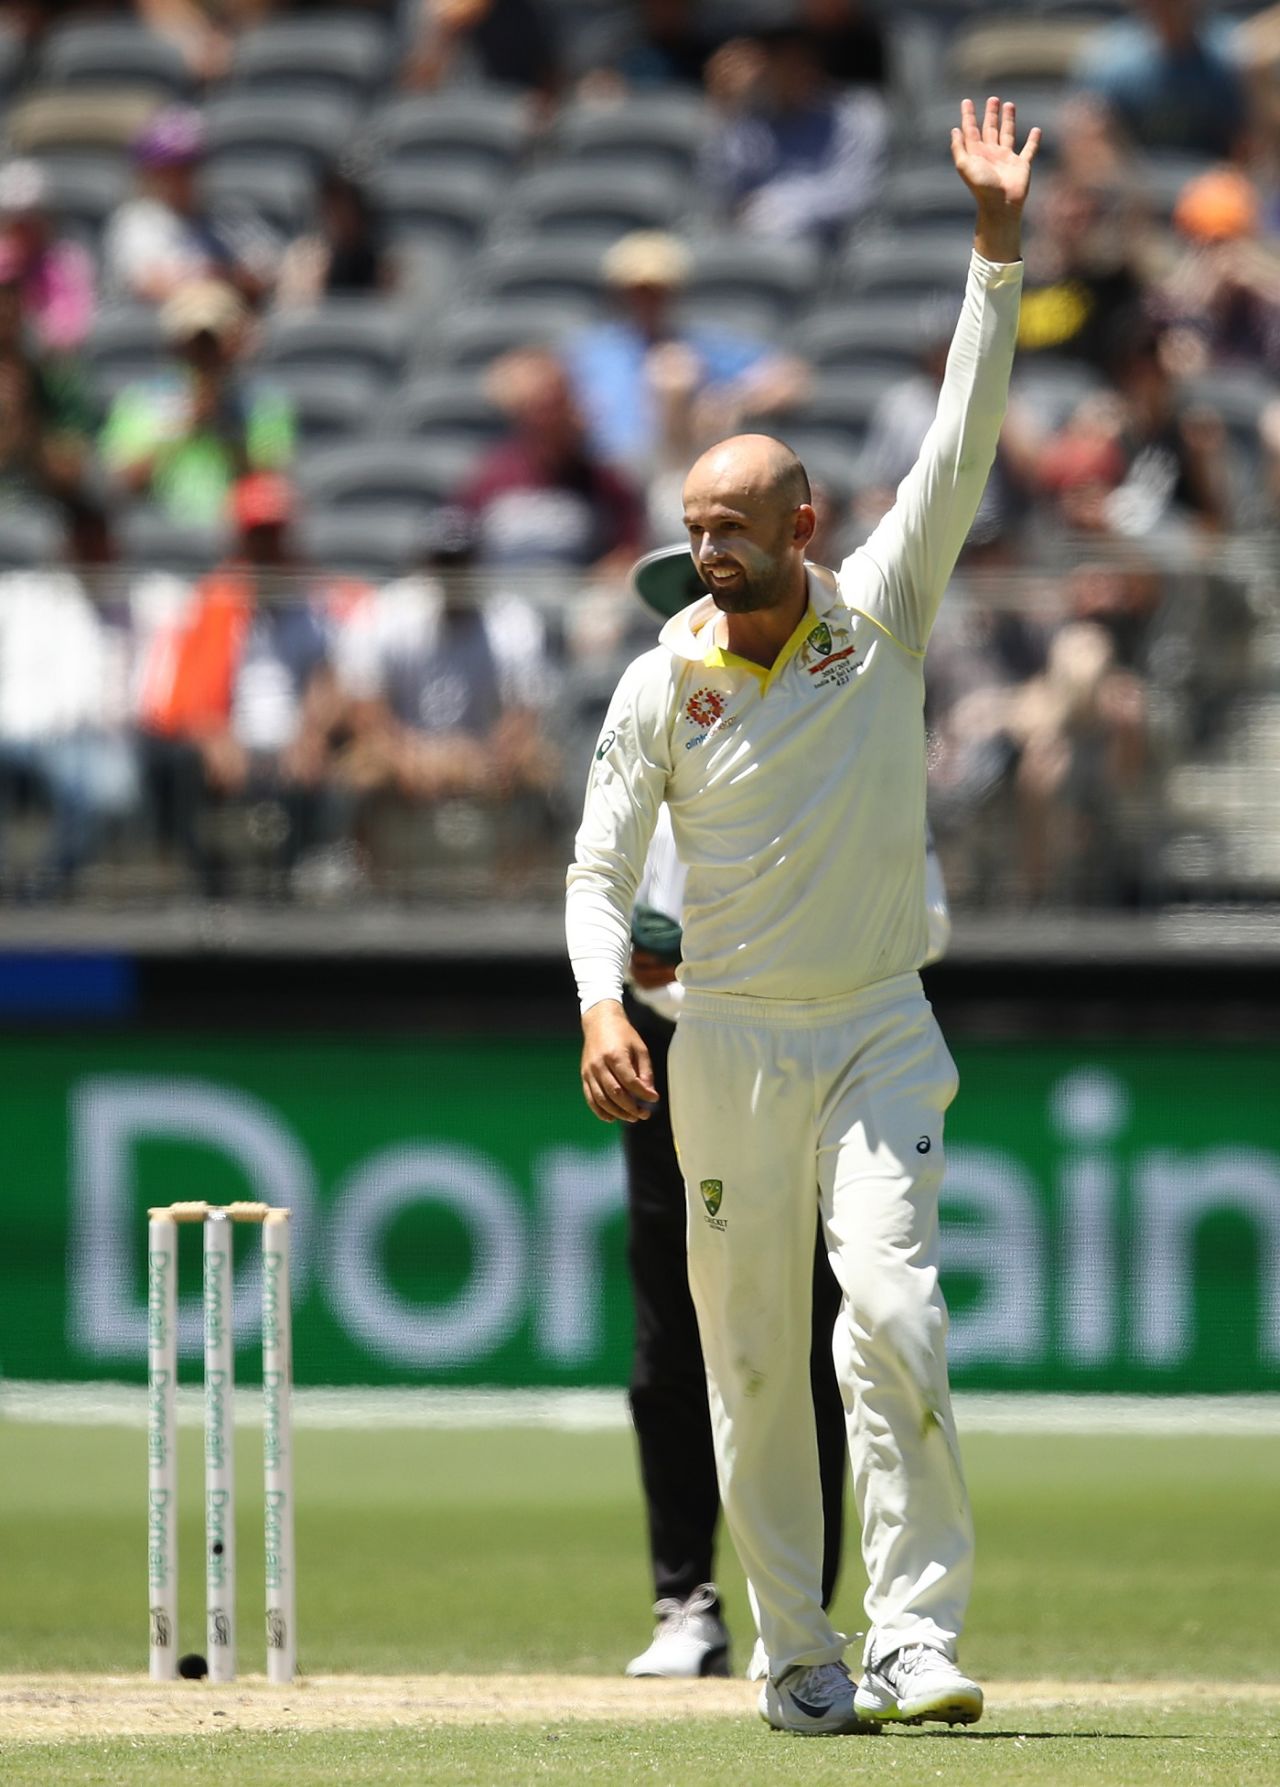 Nathan Lyon chuffed to have taken a wicket, Australia v India, 2nd Test, Perth, 5th day, December 18, 2018